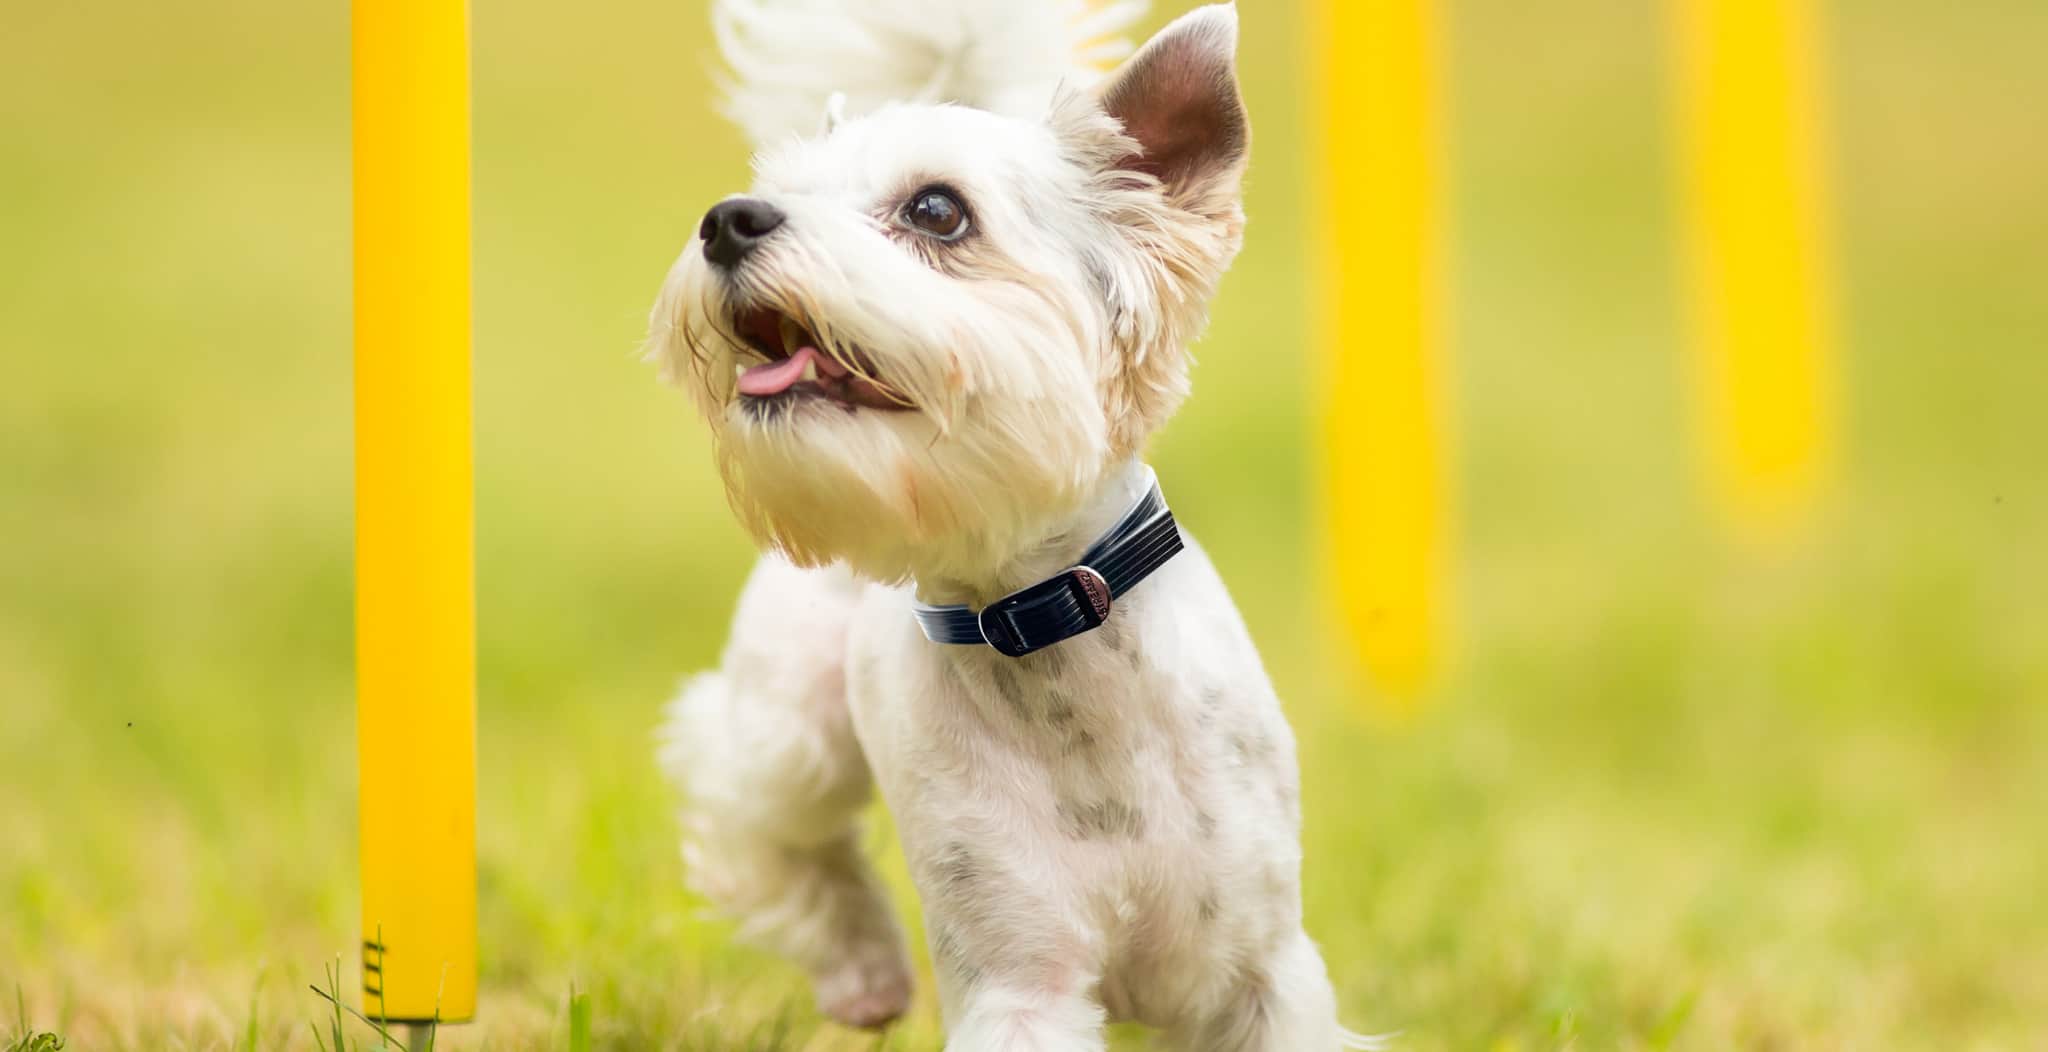 DOG Streamz advanced magnetic dog collars therapy bands for dogs and puppies. Arthritis, dysplasia elbow and hip and many age related issues. Natural and non-invasive magnetic therapy for dogs. Image of small doggy in dog streamz collar doing dog agility